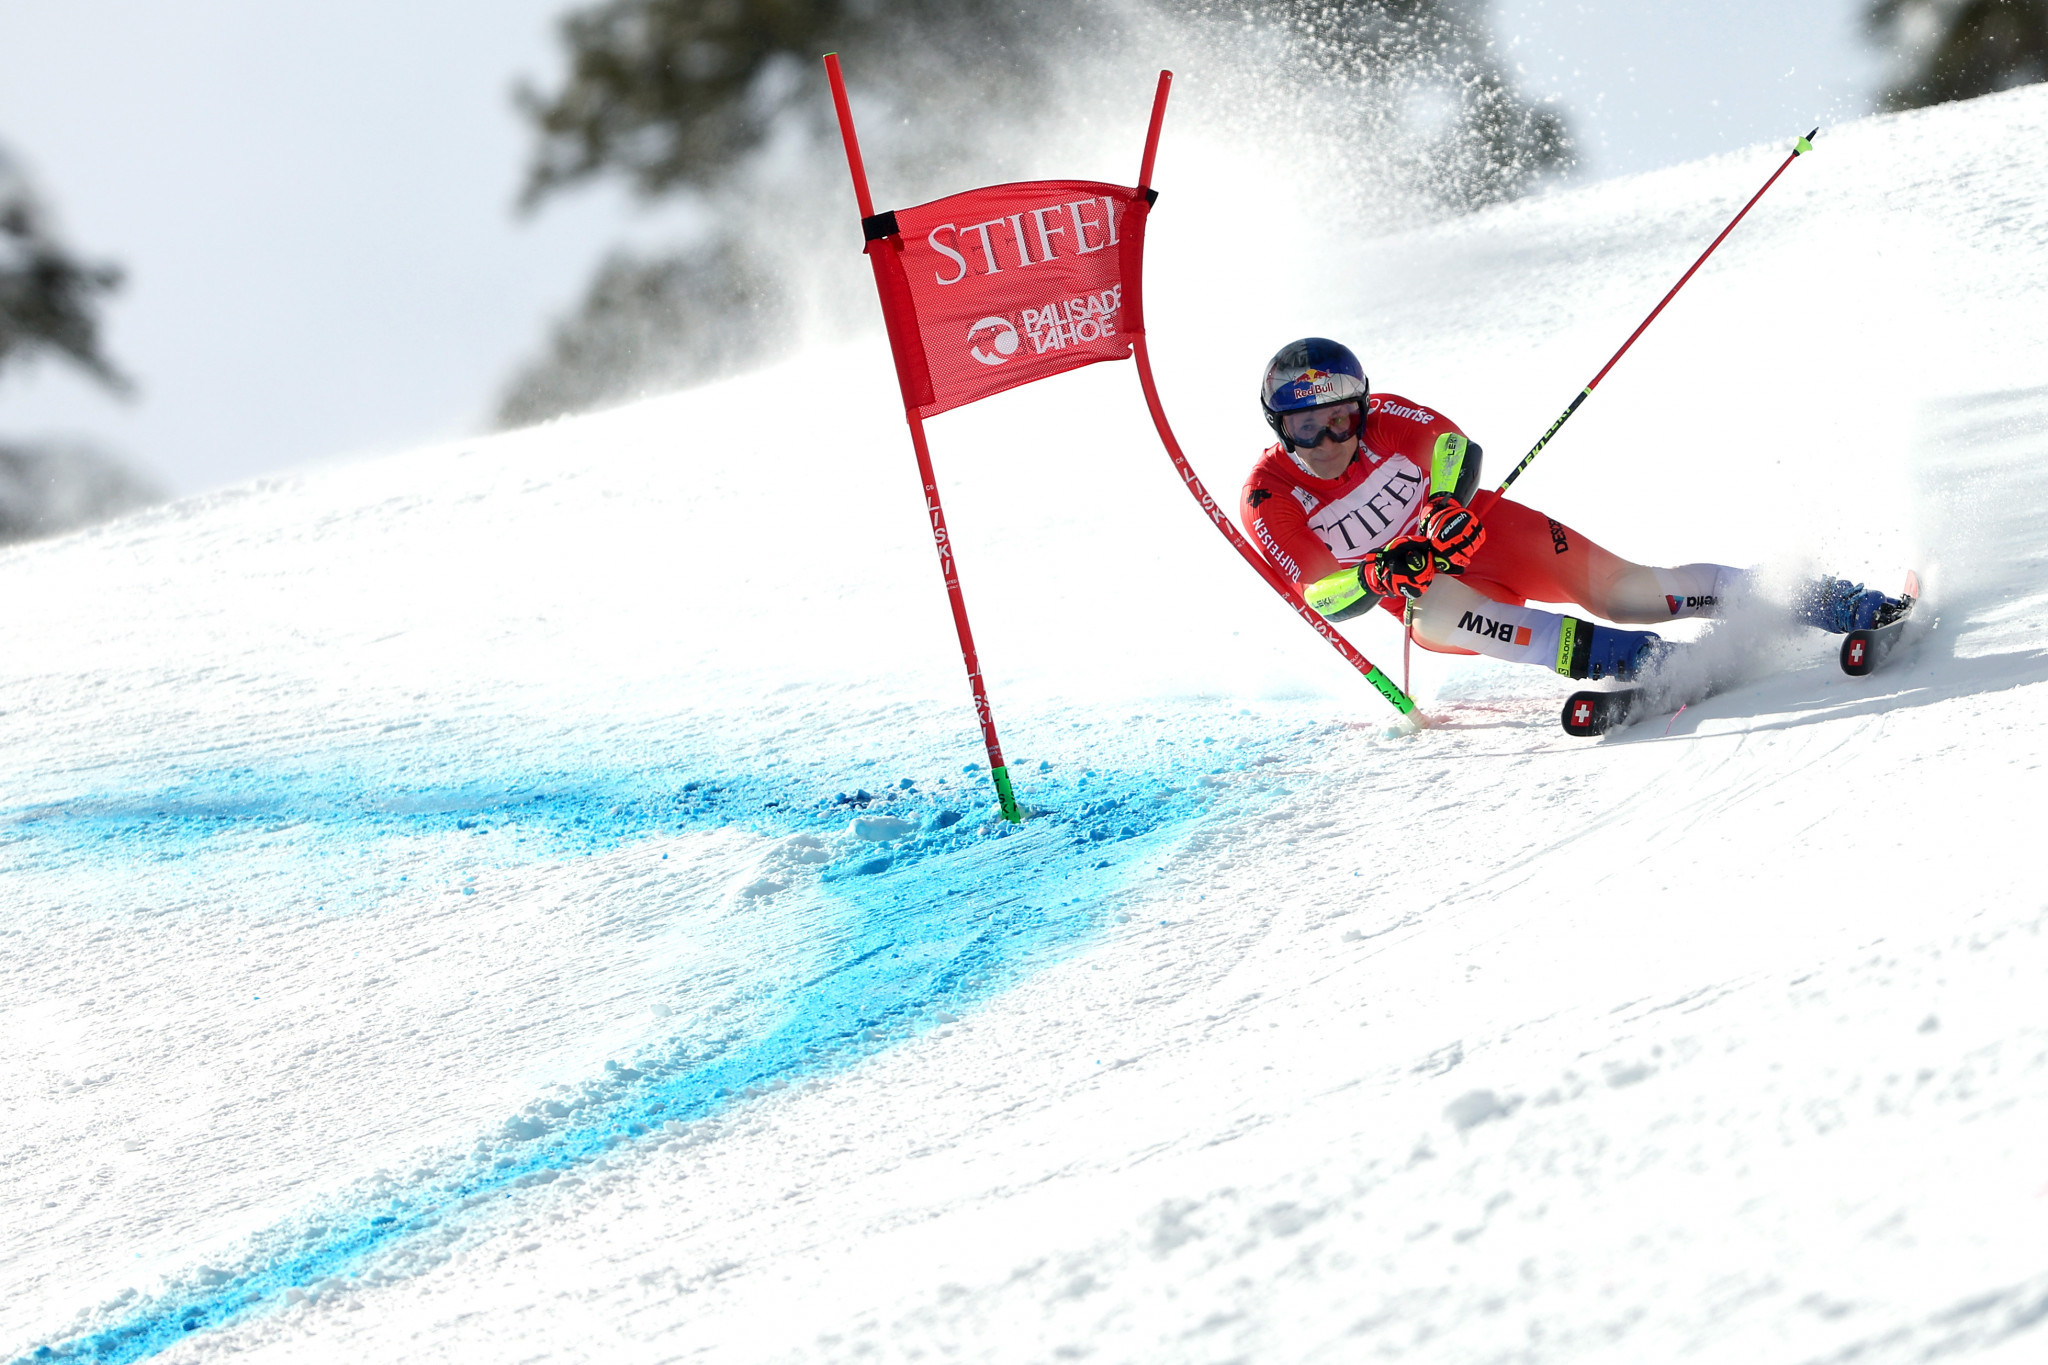 Reigning giant slalom Olympic and world champion Marco Odermatt was forced to settle for silver at the World Cup in Palisades Tahoe ©Getty Images